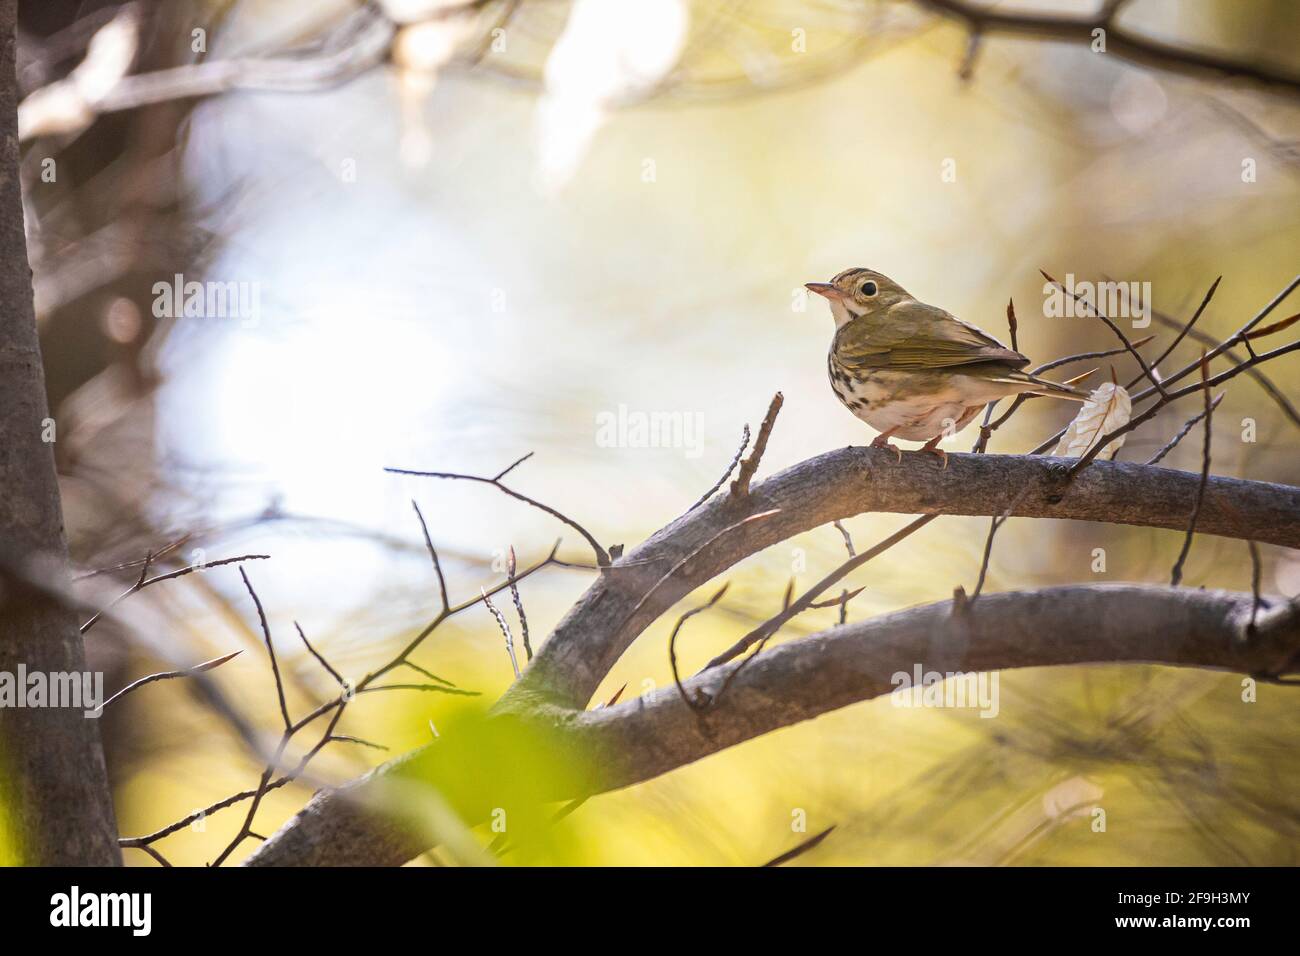 An ovenbird looks over its shoulder at me from a branch before taking off into the blue and yellow background.  Leaves are just beginning to emerge. Stock Photo